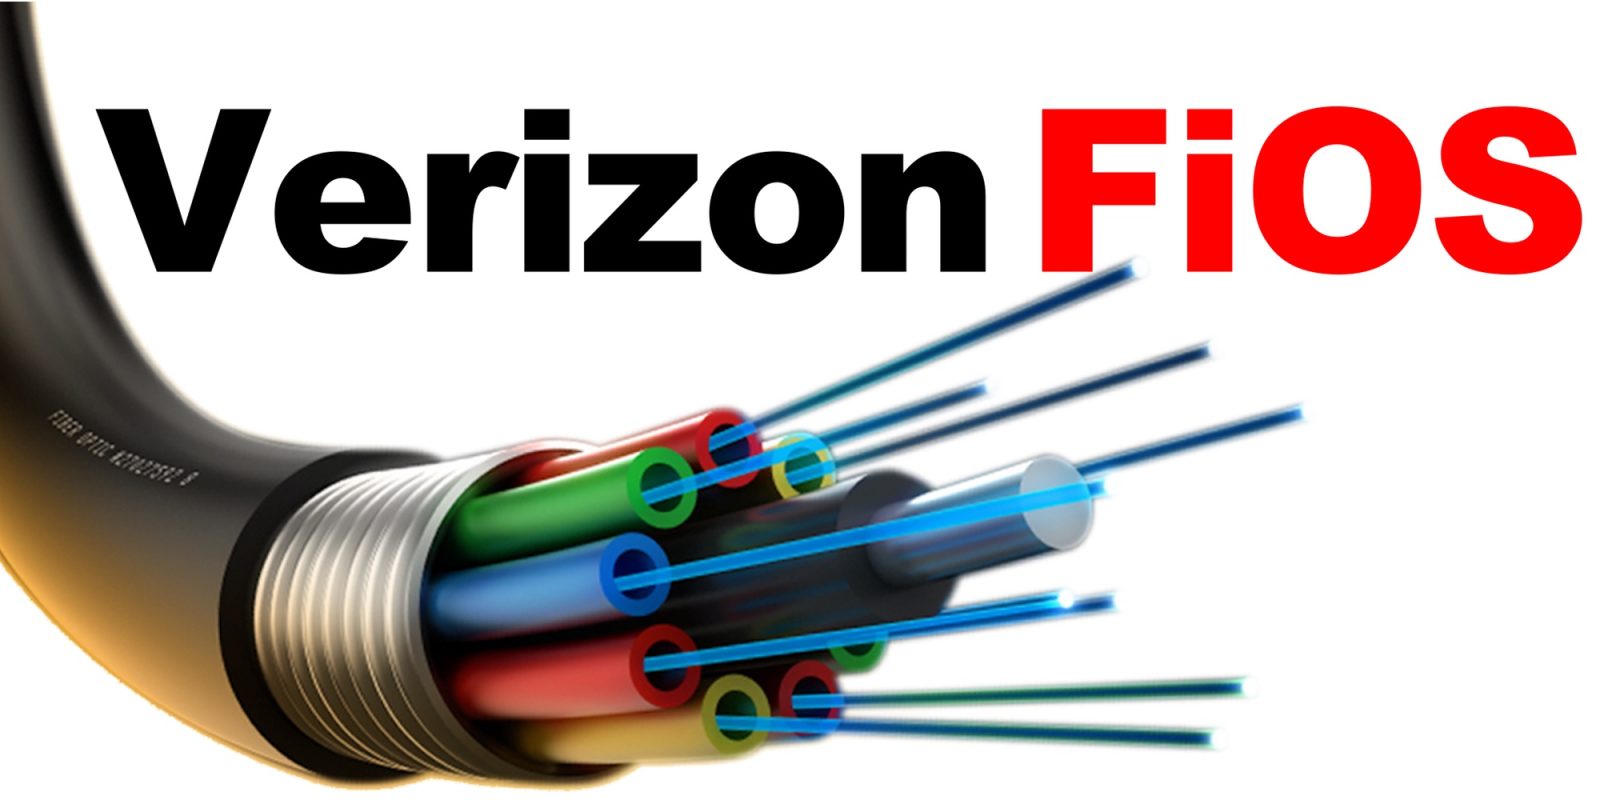 Verizon Fios Now Offers 100 Internet For 40 A Month 20 Off